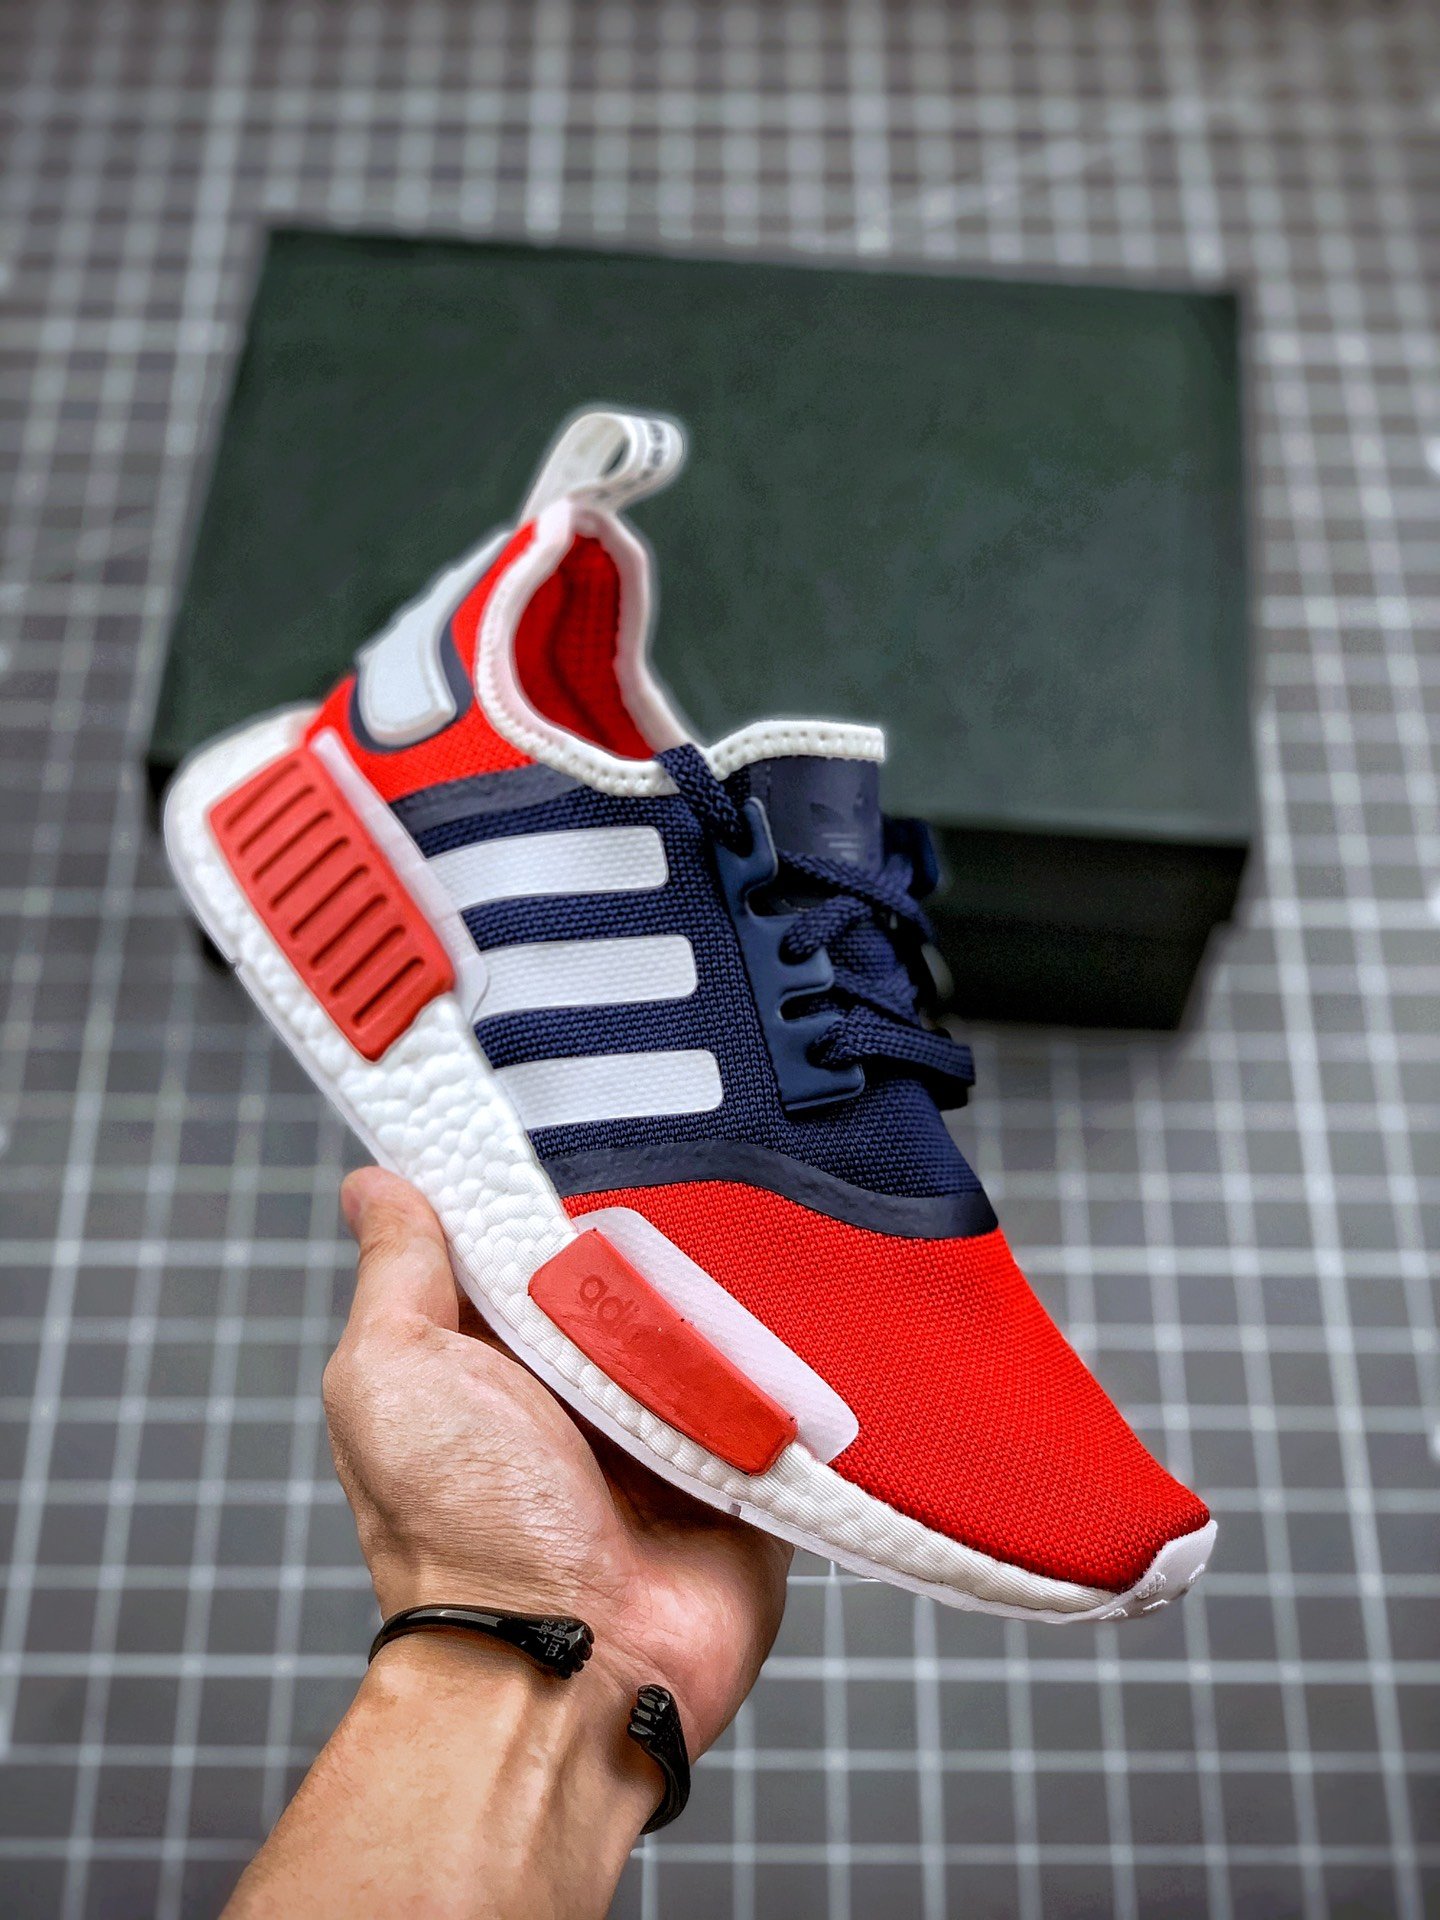 adidas NMD R1 Collegiate Navy/Scarlet-Cloud White Shoes